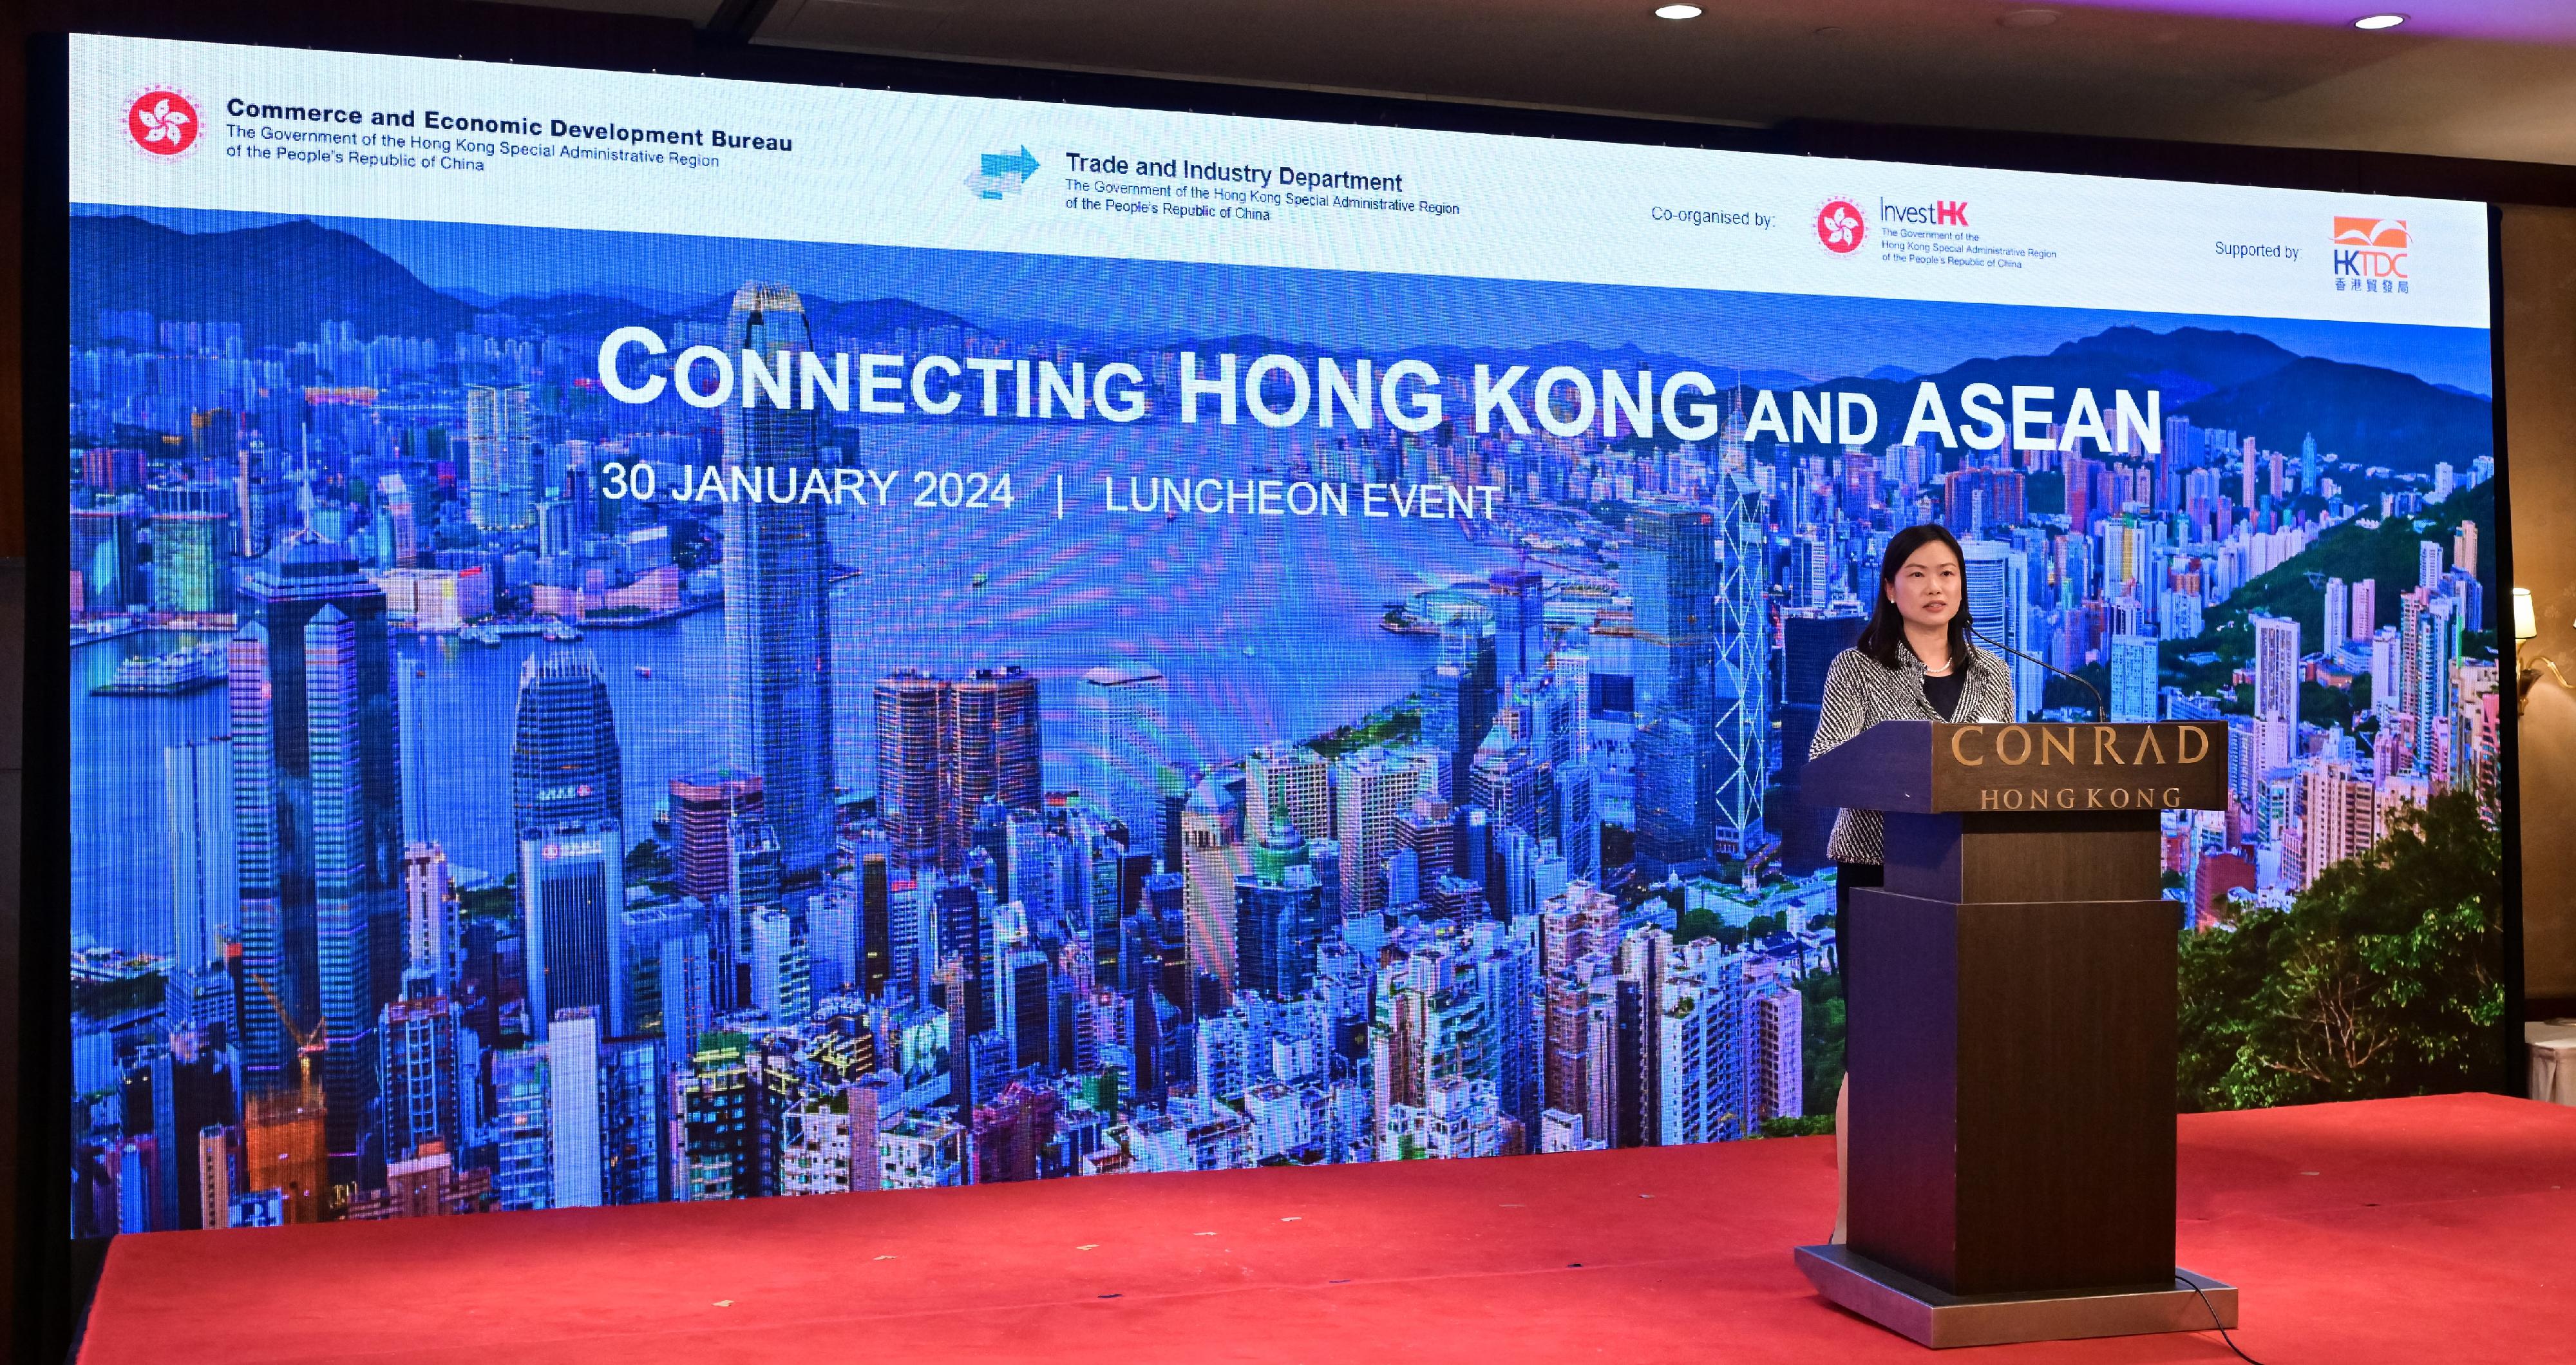 The Trade and Industry Department and Invest Hong Kong today (January 30) co-organised the "Connecting Hong Kong and ASEAN" Luncheon for some 120 representatives of consulates, local and foreign chambers of commerce, professional bodies and the business community to update them on the Government's work on strengthening connection with the Association of Southeast Asian Nations. Photo shows the Director-General of Trade and Industry, Ms Maggie Wong, delivering closing remarks at the luncheon.